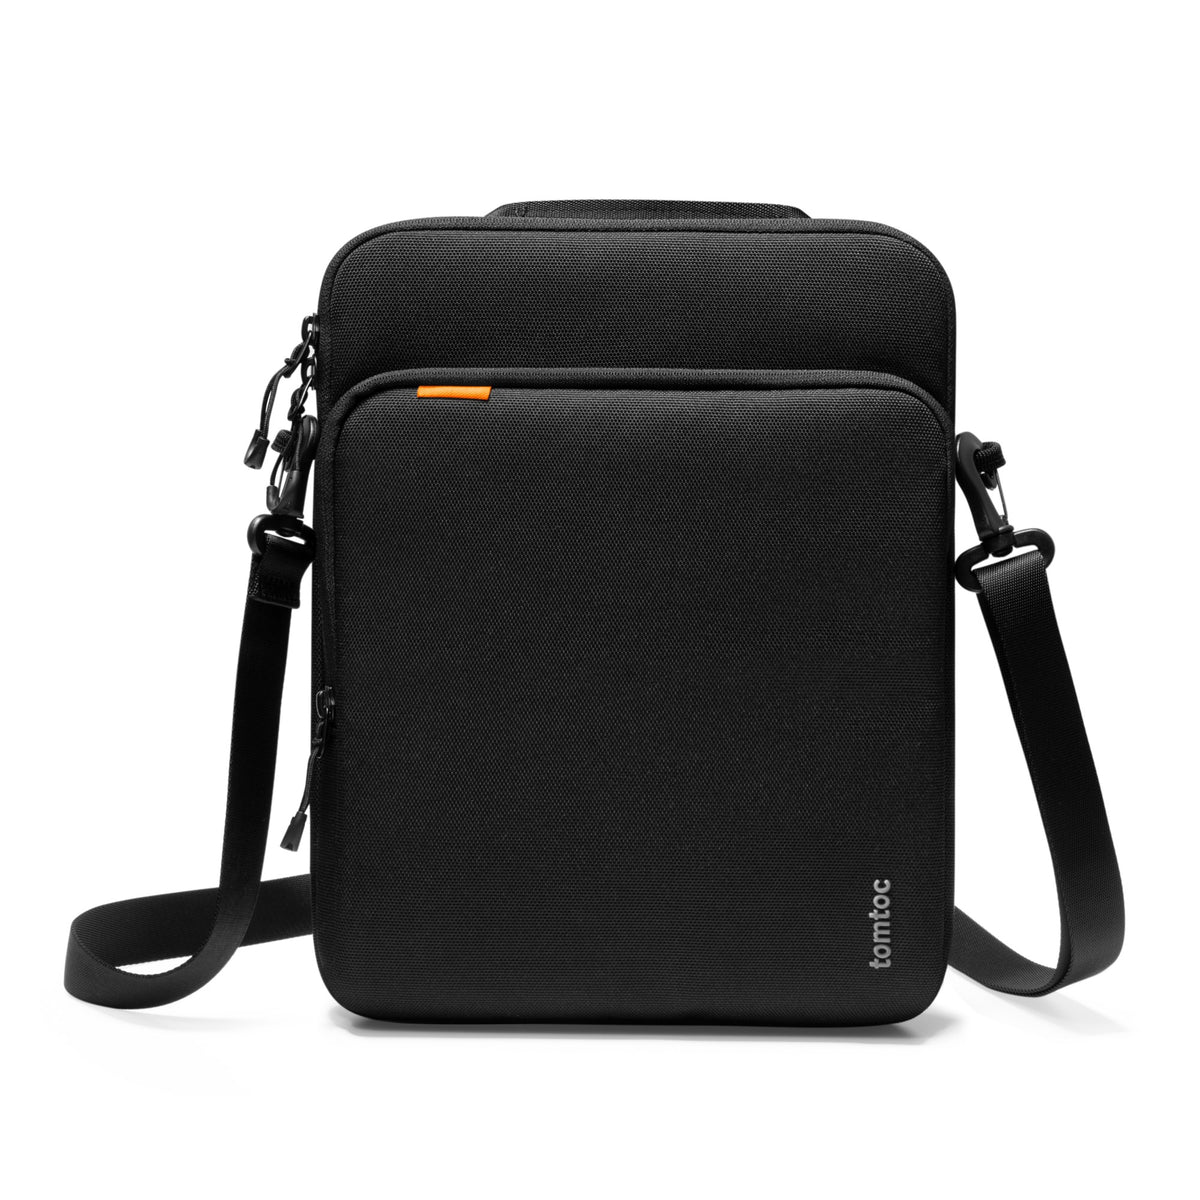 primary_DefenderACE-B03 Tablet Shoulder Bag For 10.9-inch/12.9-inch iPad Air/Pro